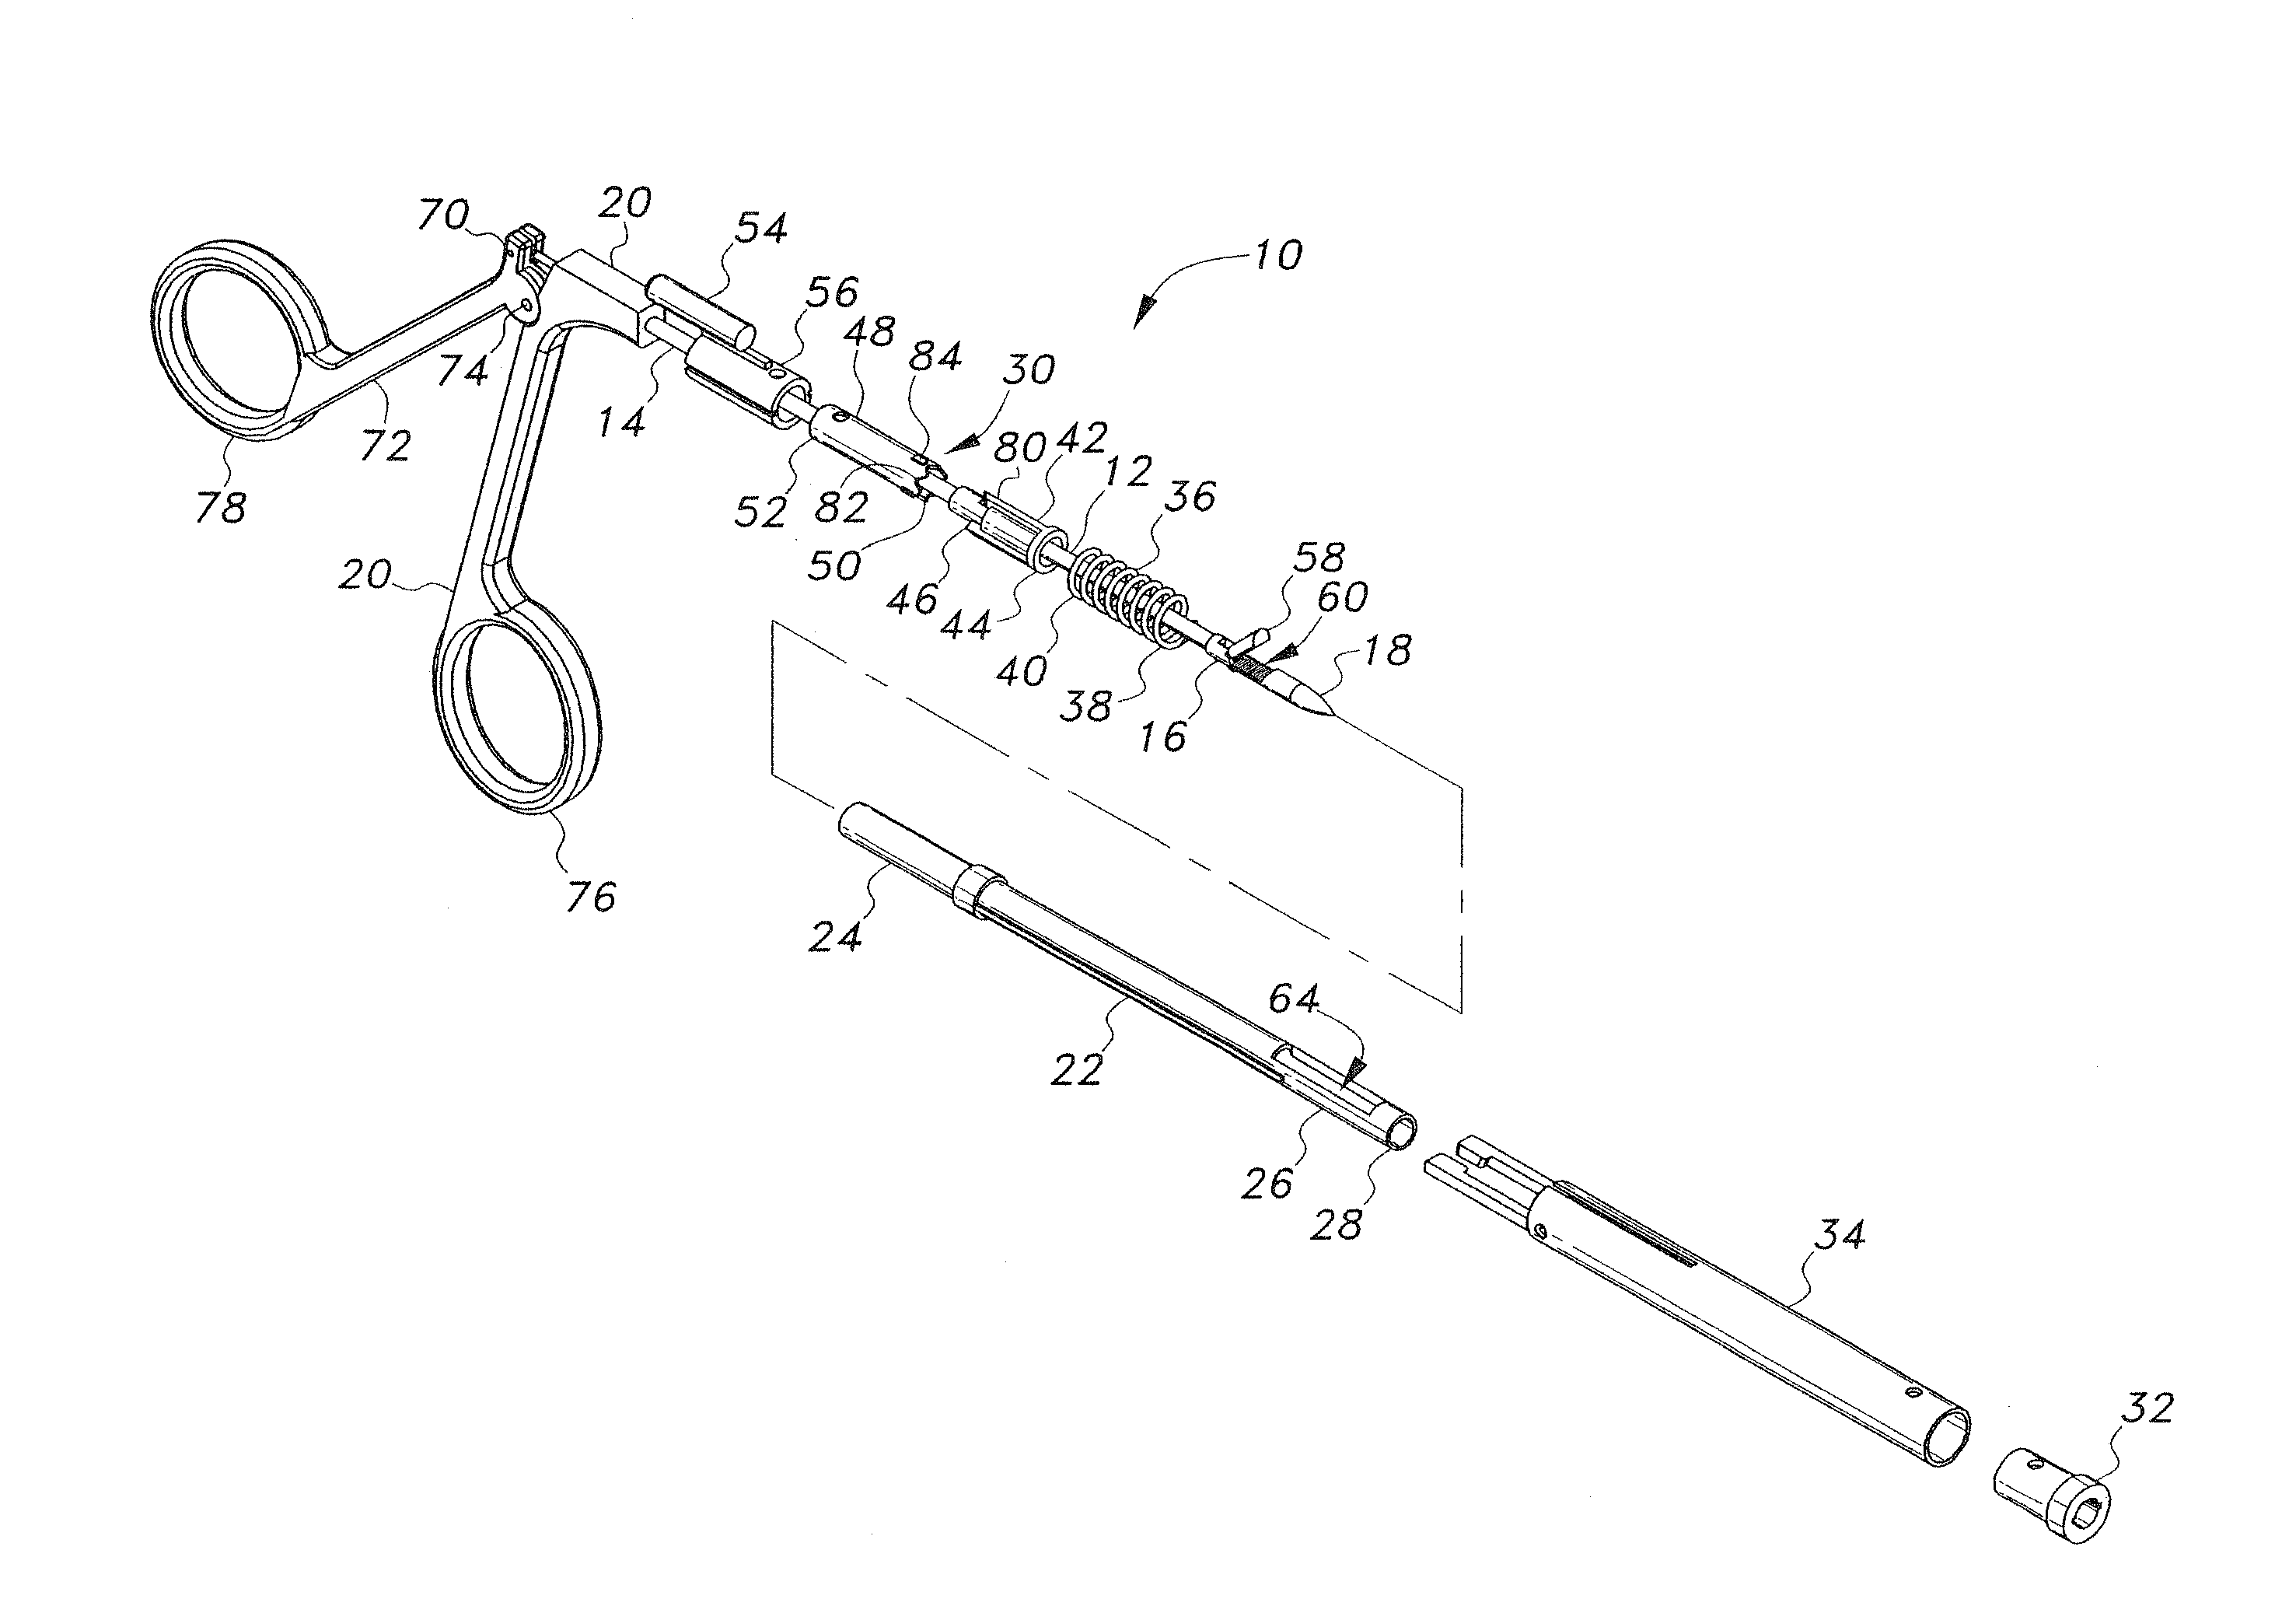 Suture passer with retractable needle sheath